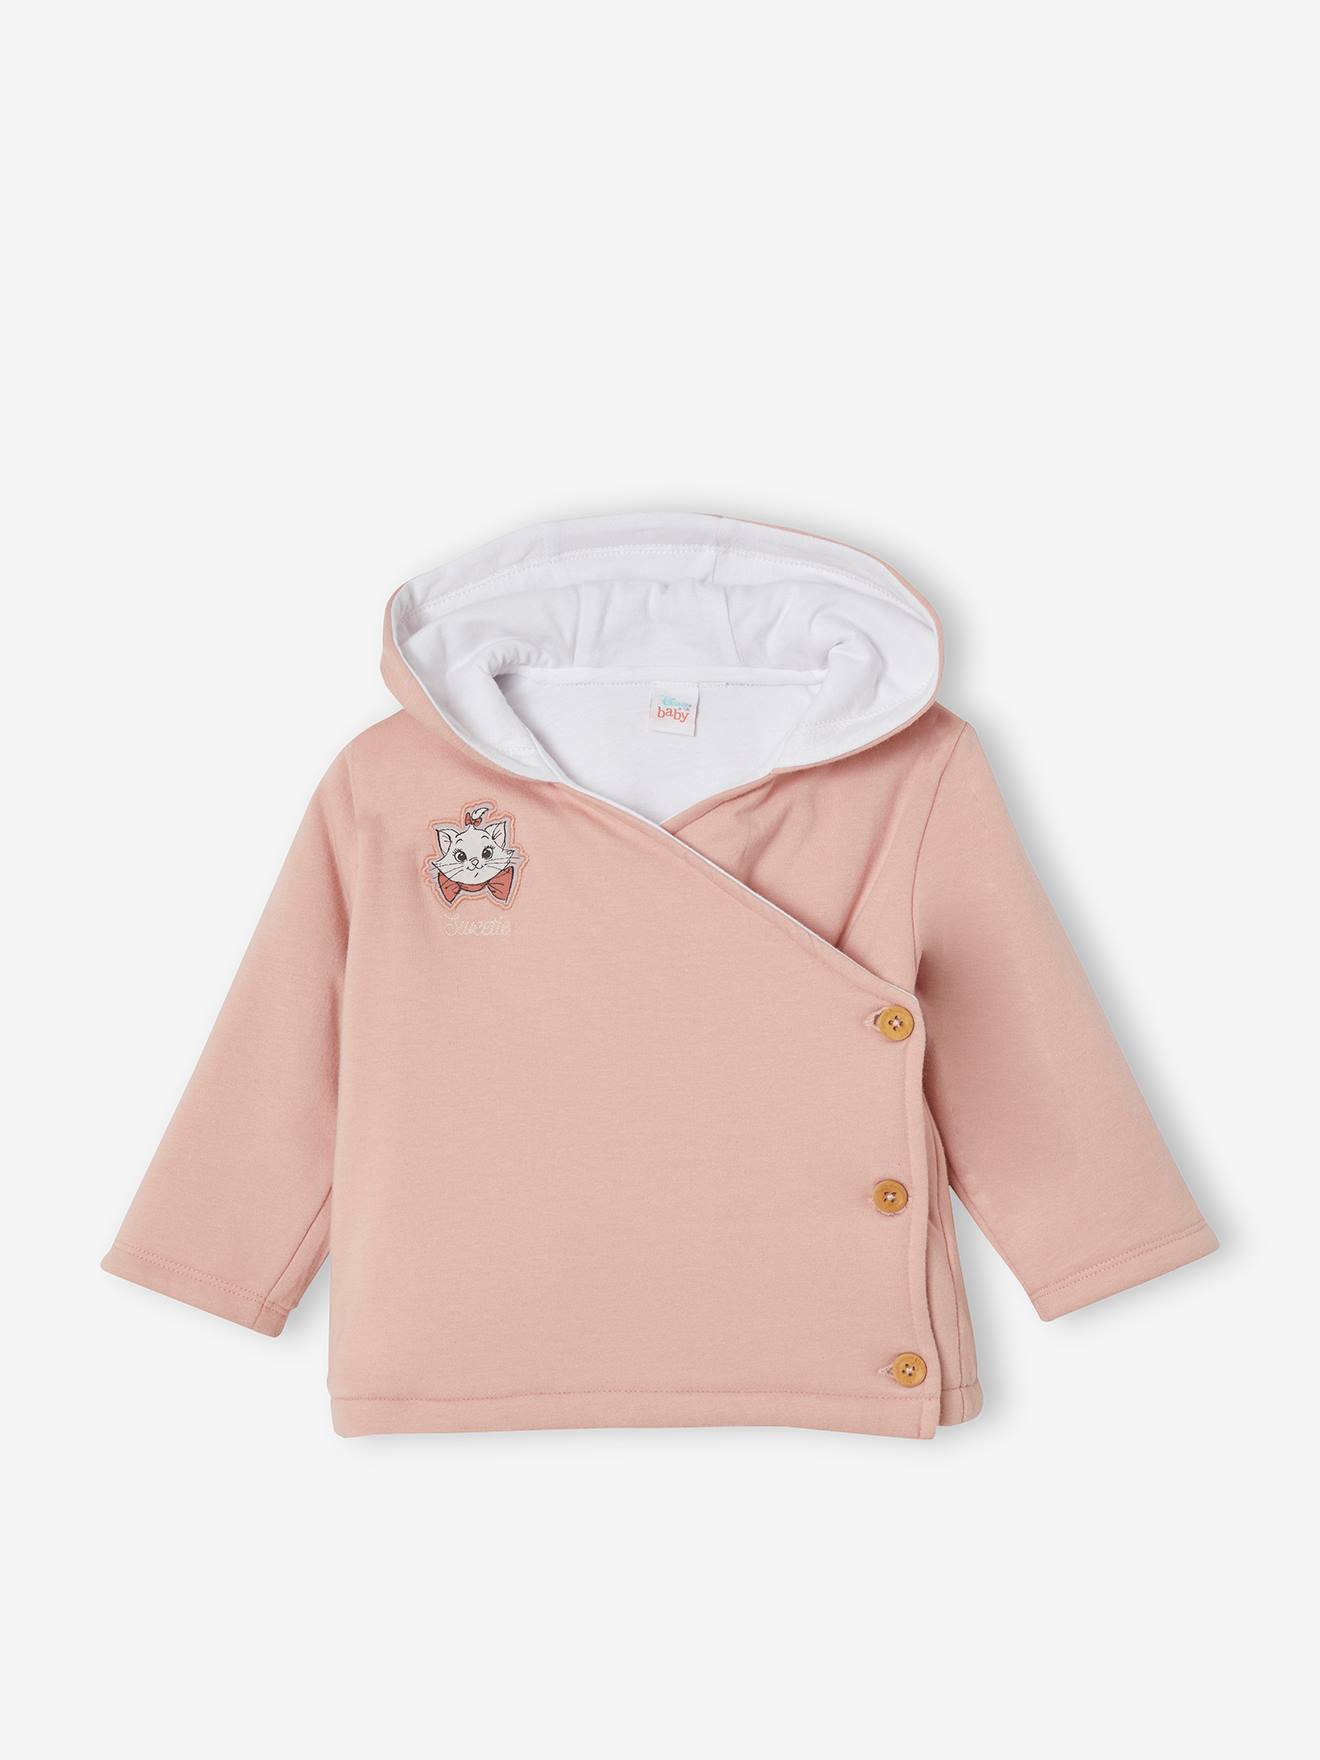 Marie of the Aristocats Jacket for Babies, by Disney(r) pink medium solid with desig